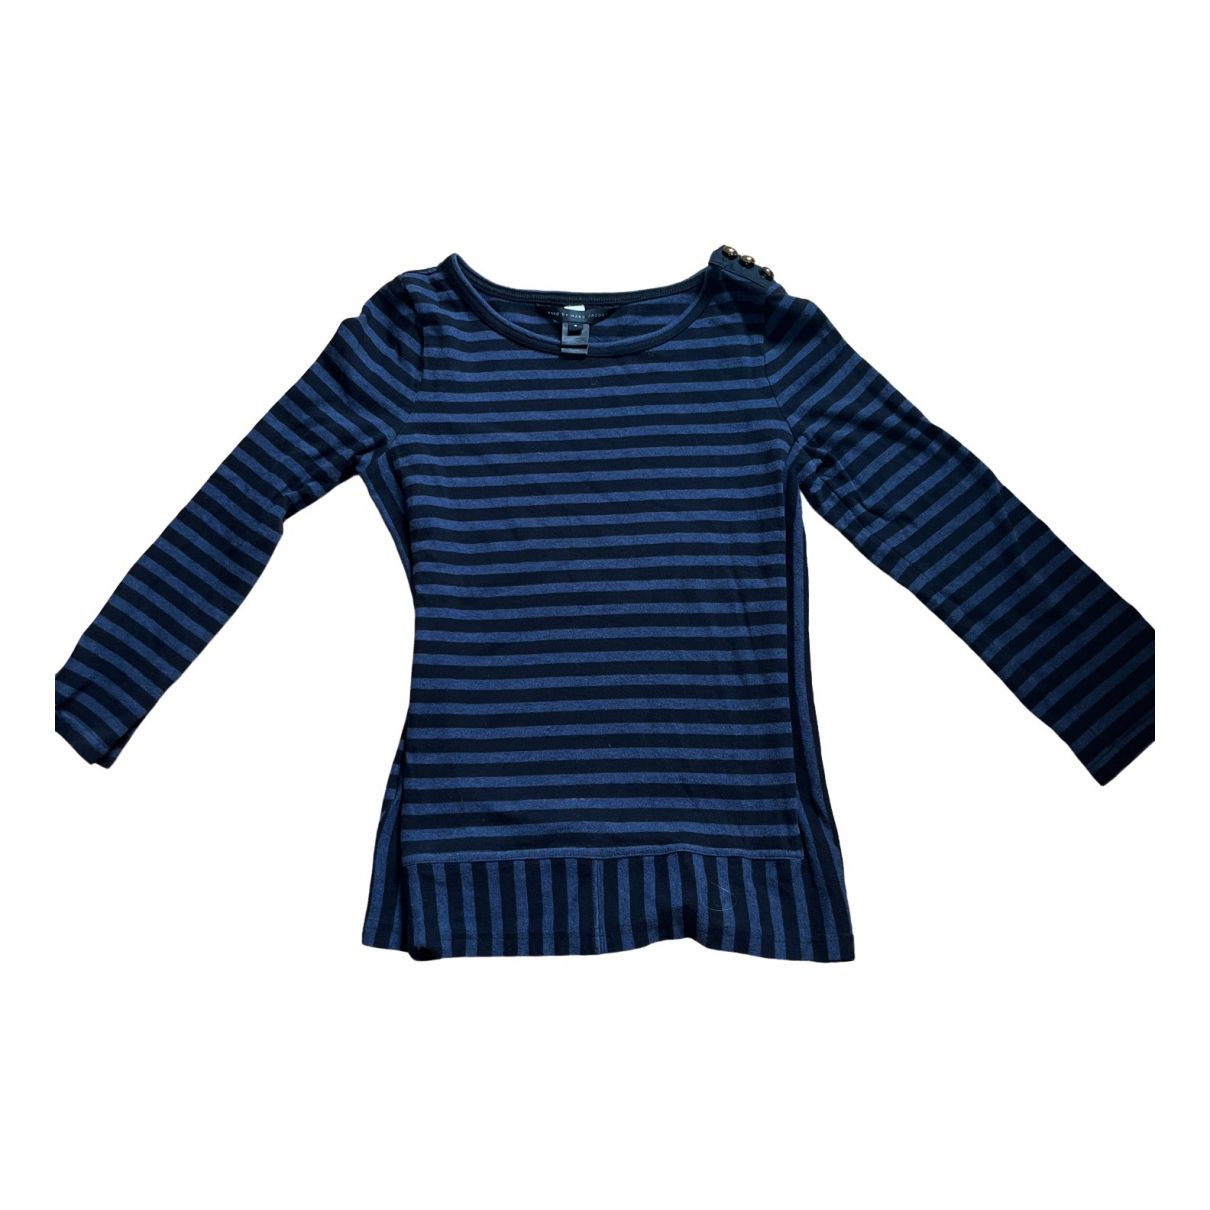 Jumper Marc by Marc Jacobs